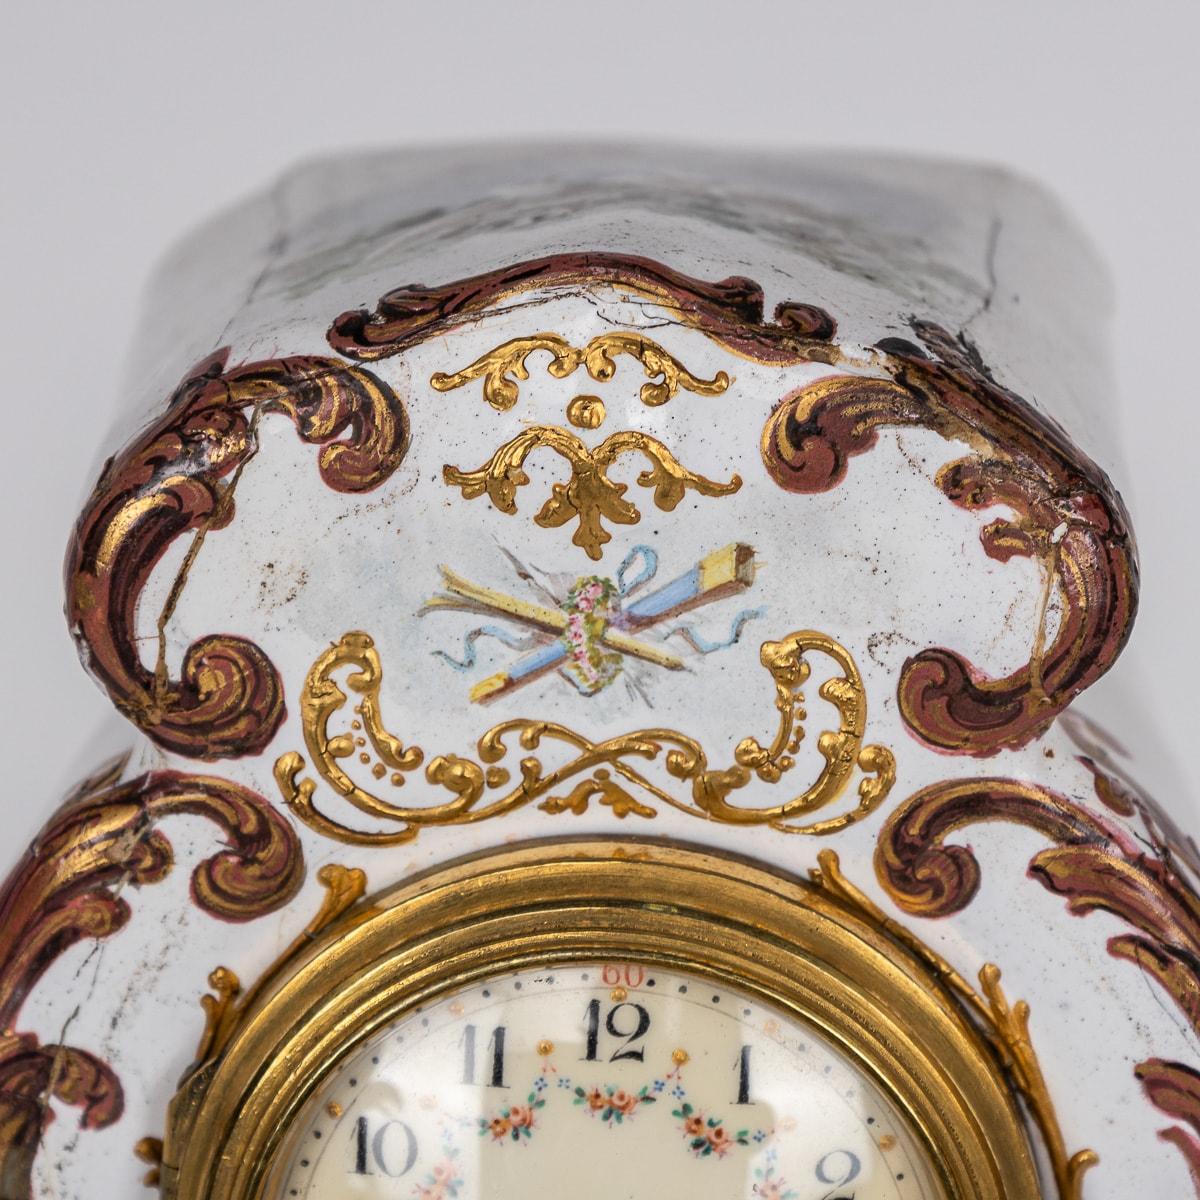 18th Century English Enamel Table Clock With Floral & Romantic Scenes c.1770 For Sale 2